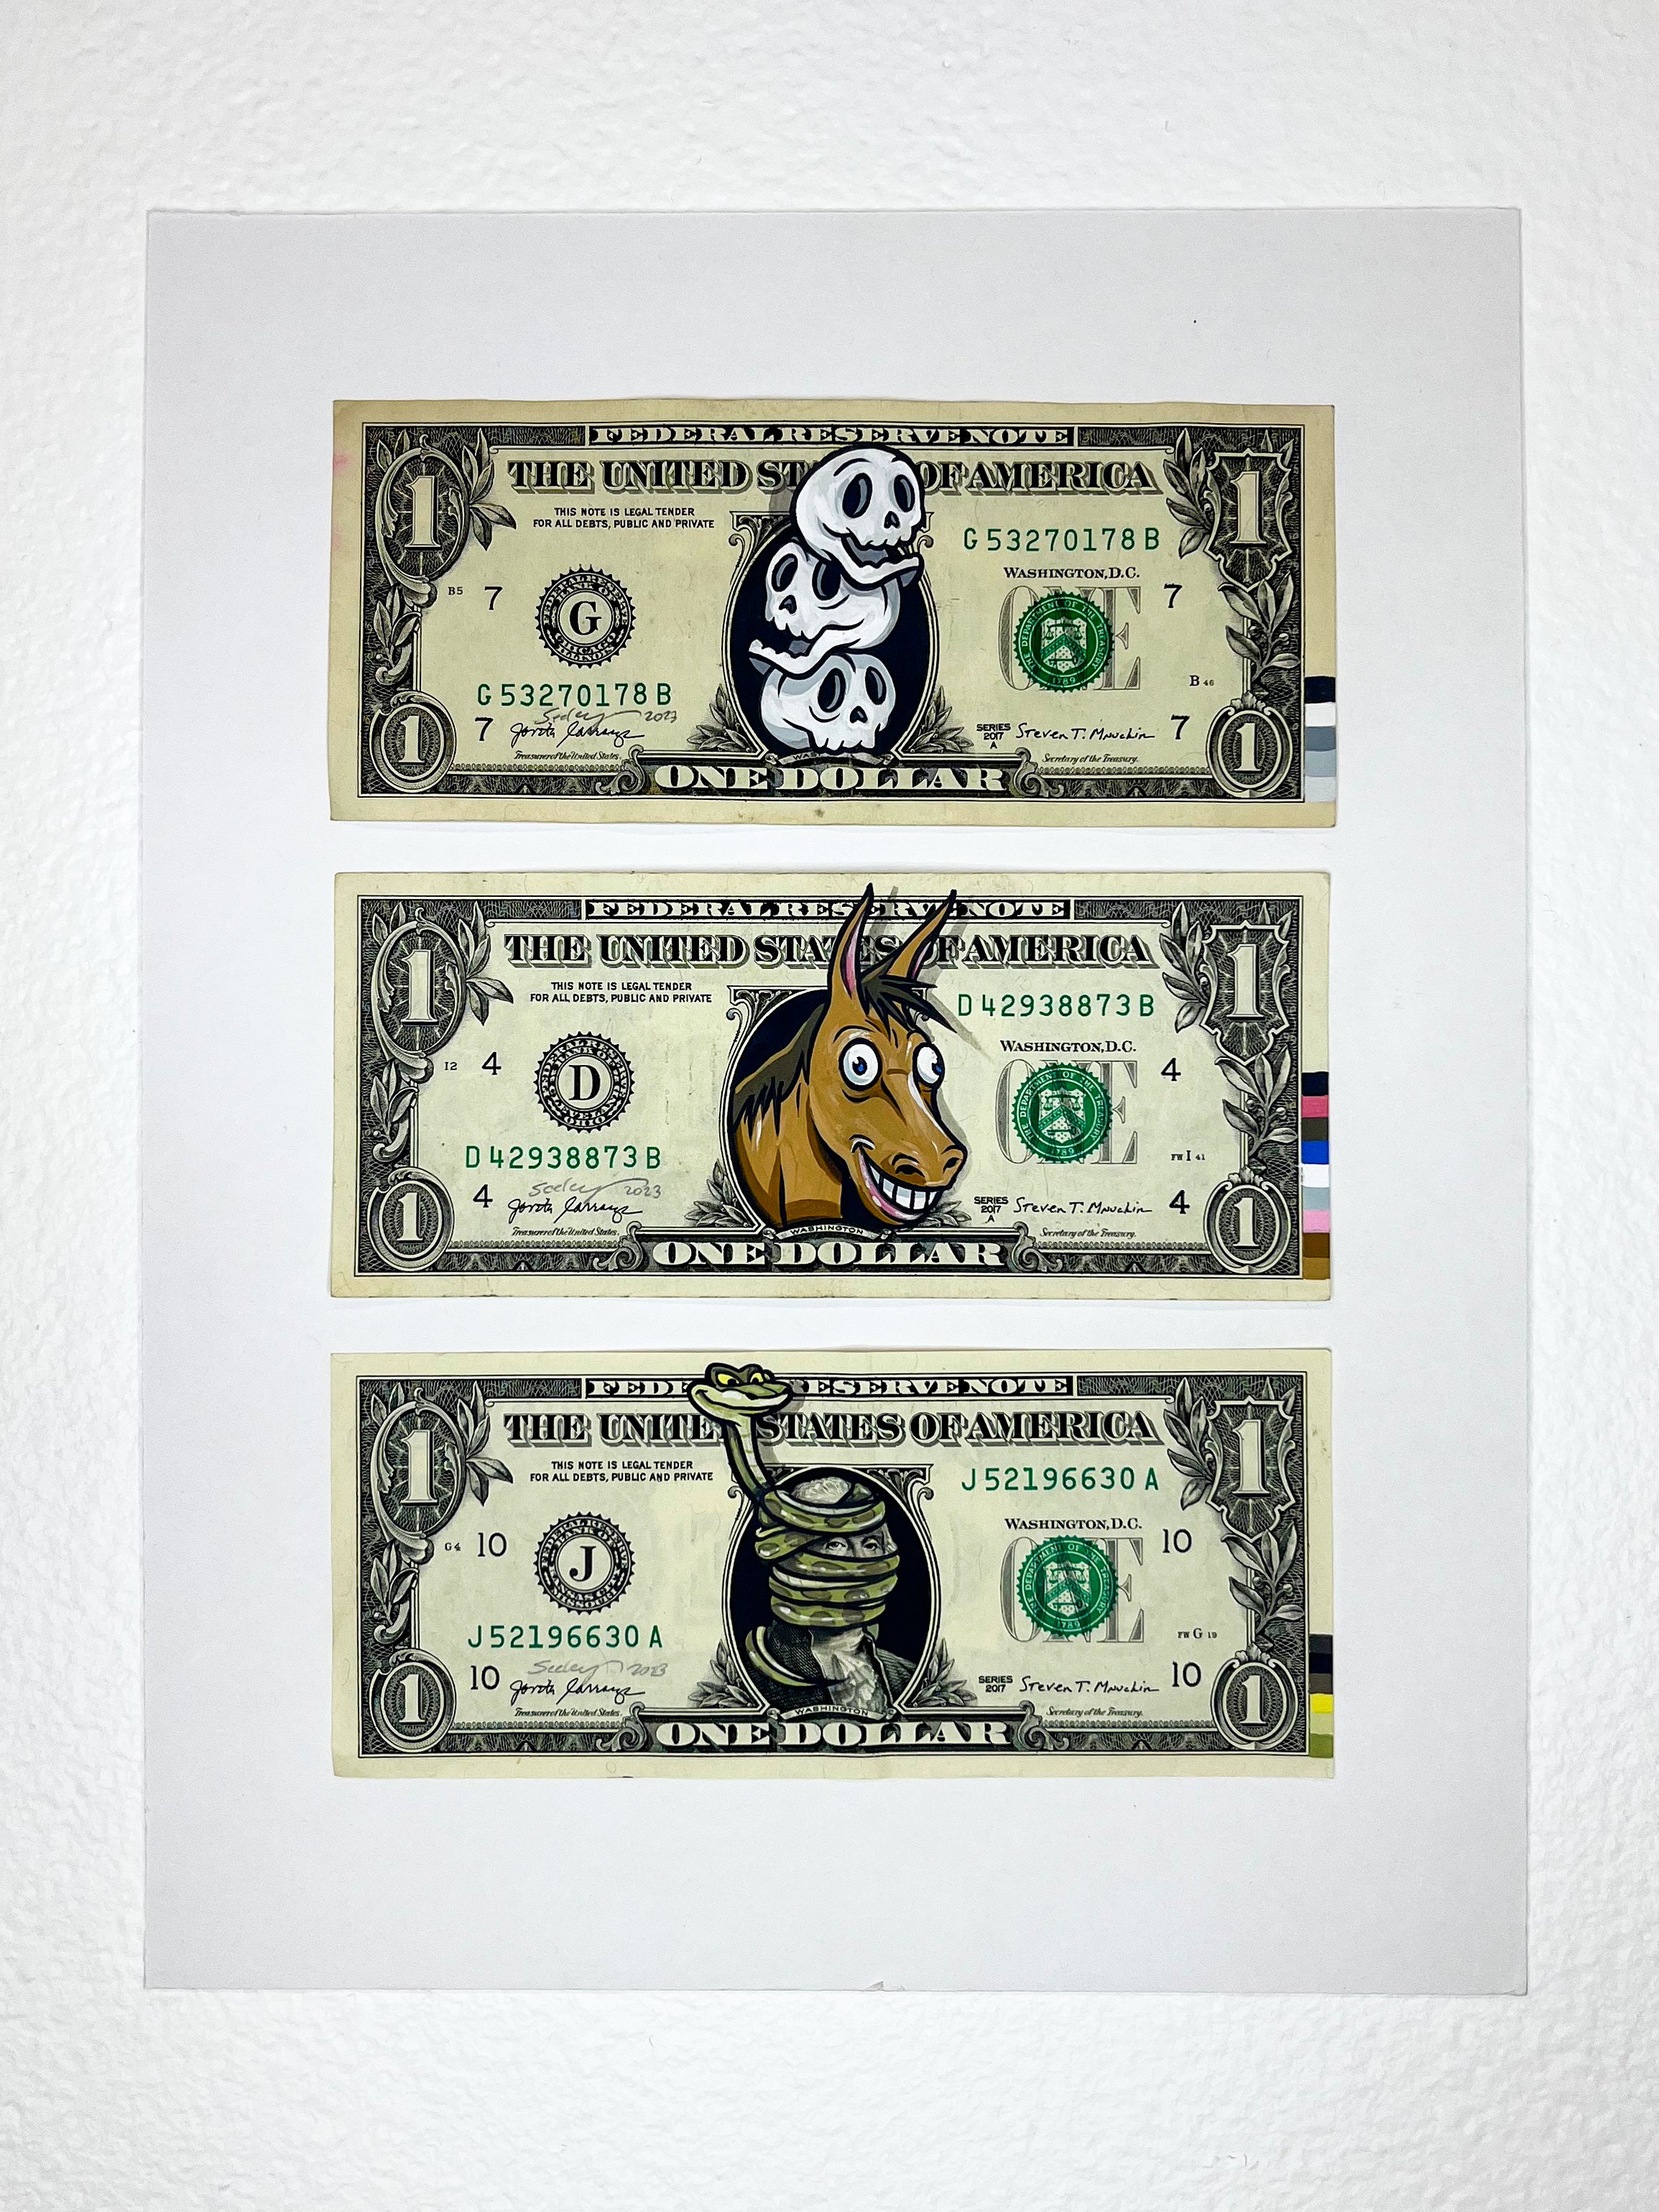 “Untitled (3 dollars)” by Steve Seeley